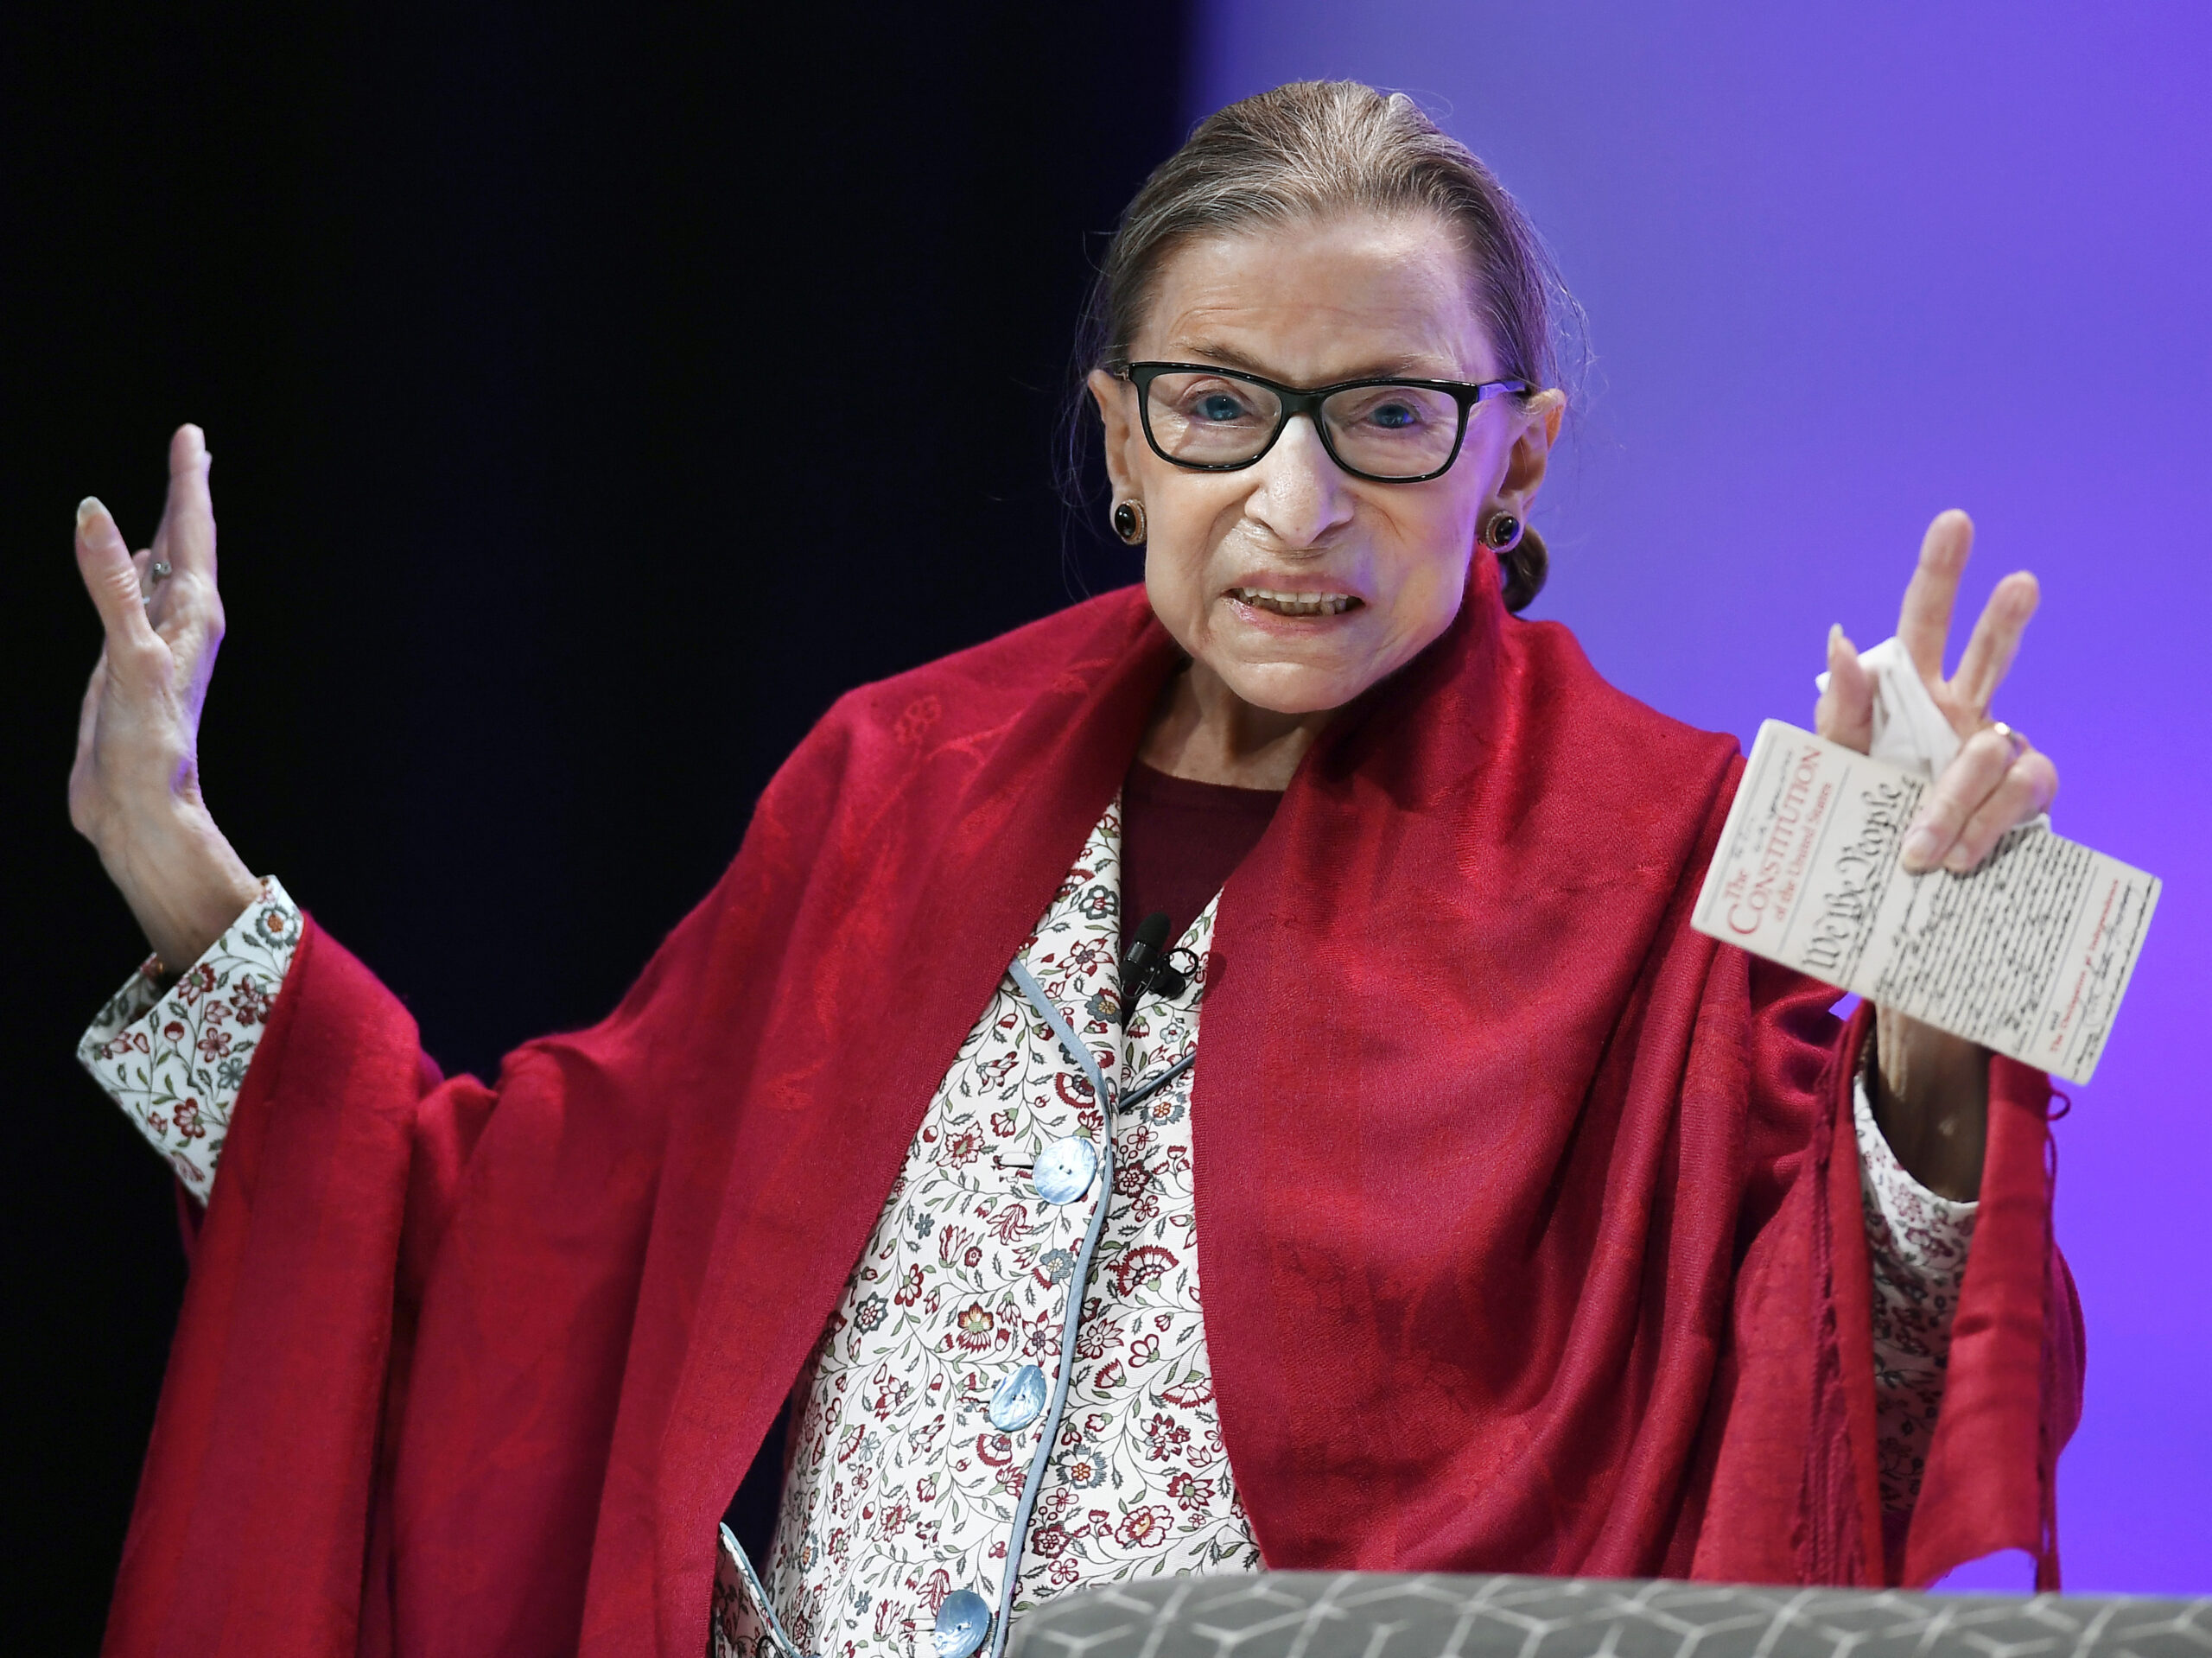 RBG’s family condemns the selection of recipients of an award named in her honor